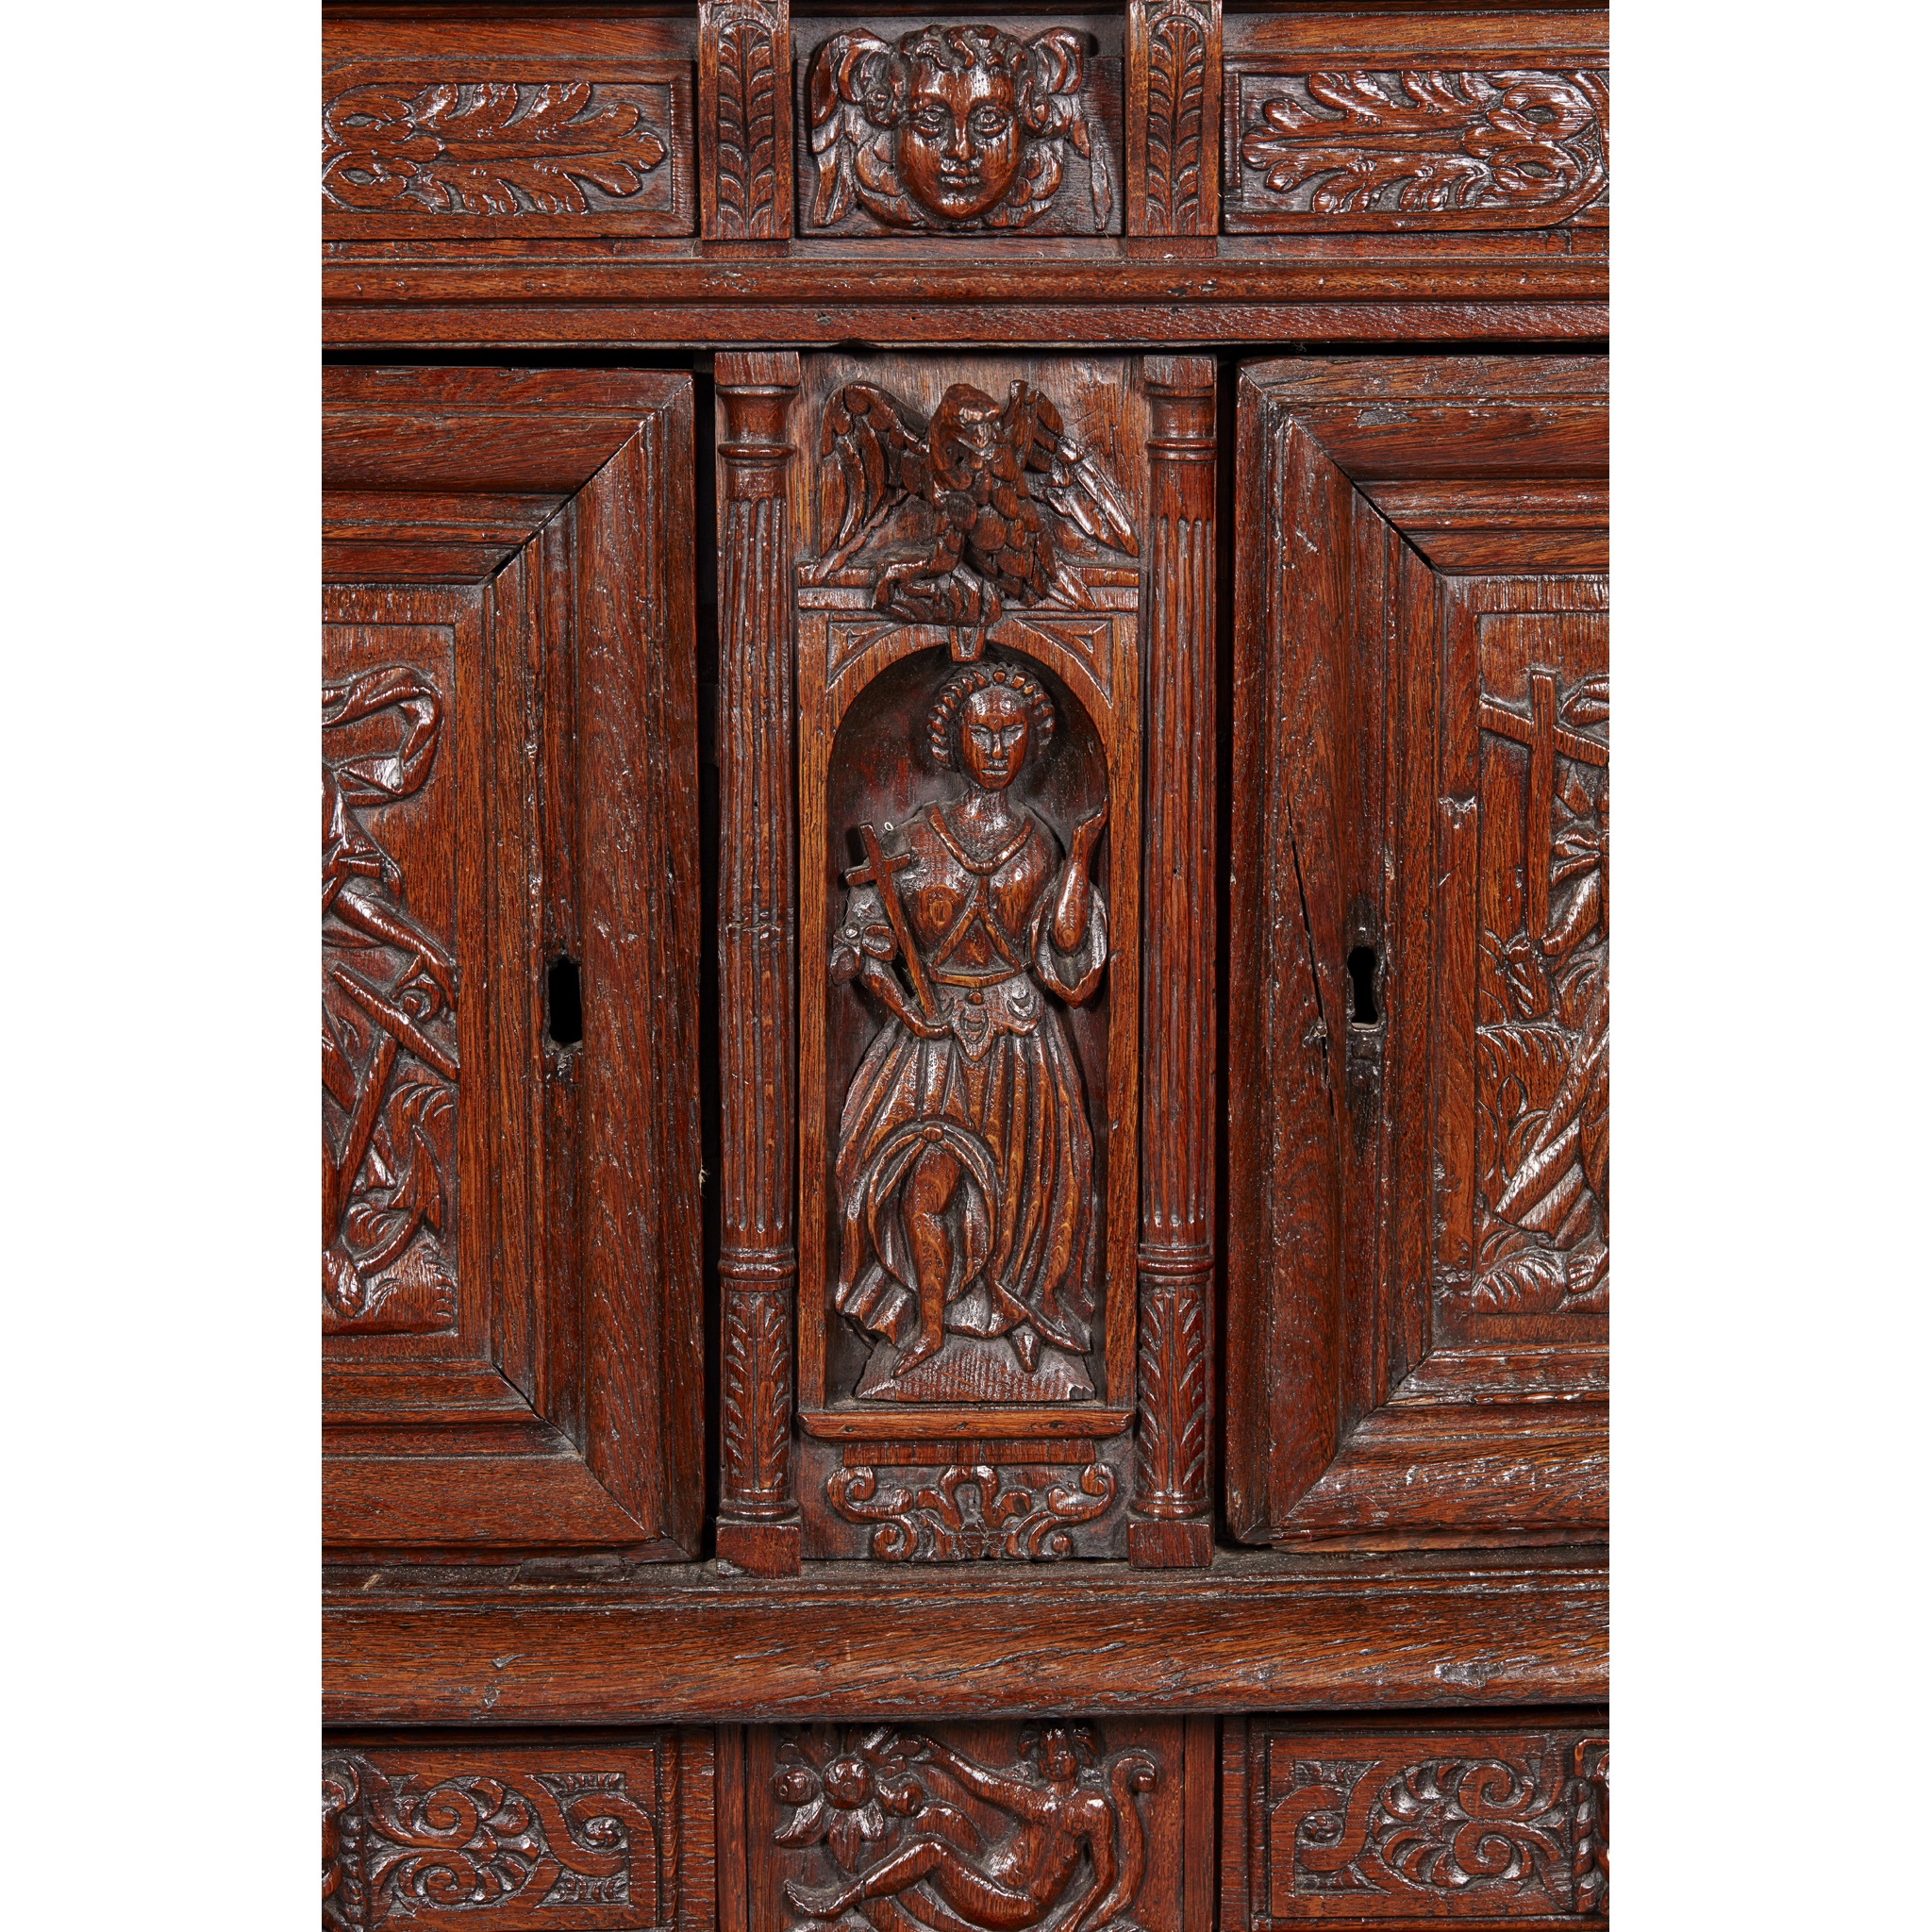 FRENCH RENAISSANCE OAK AND WALNUT DRESSOIR EARLY 17TH CENTURY - Image 2 of 3